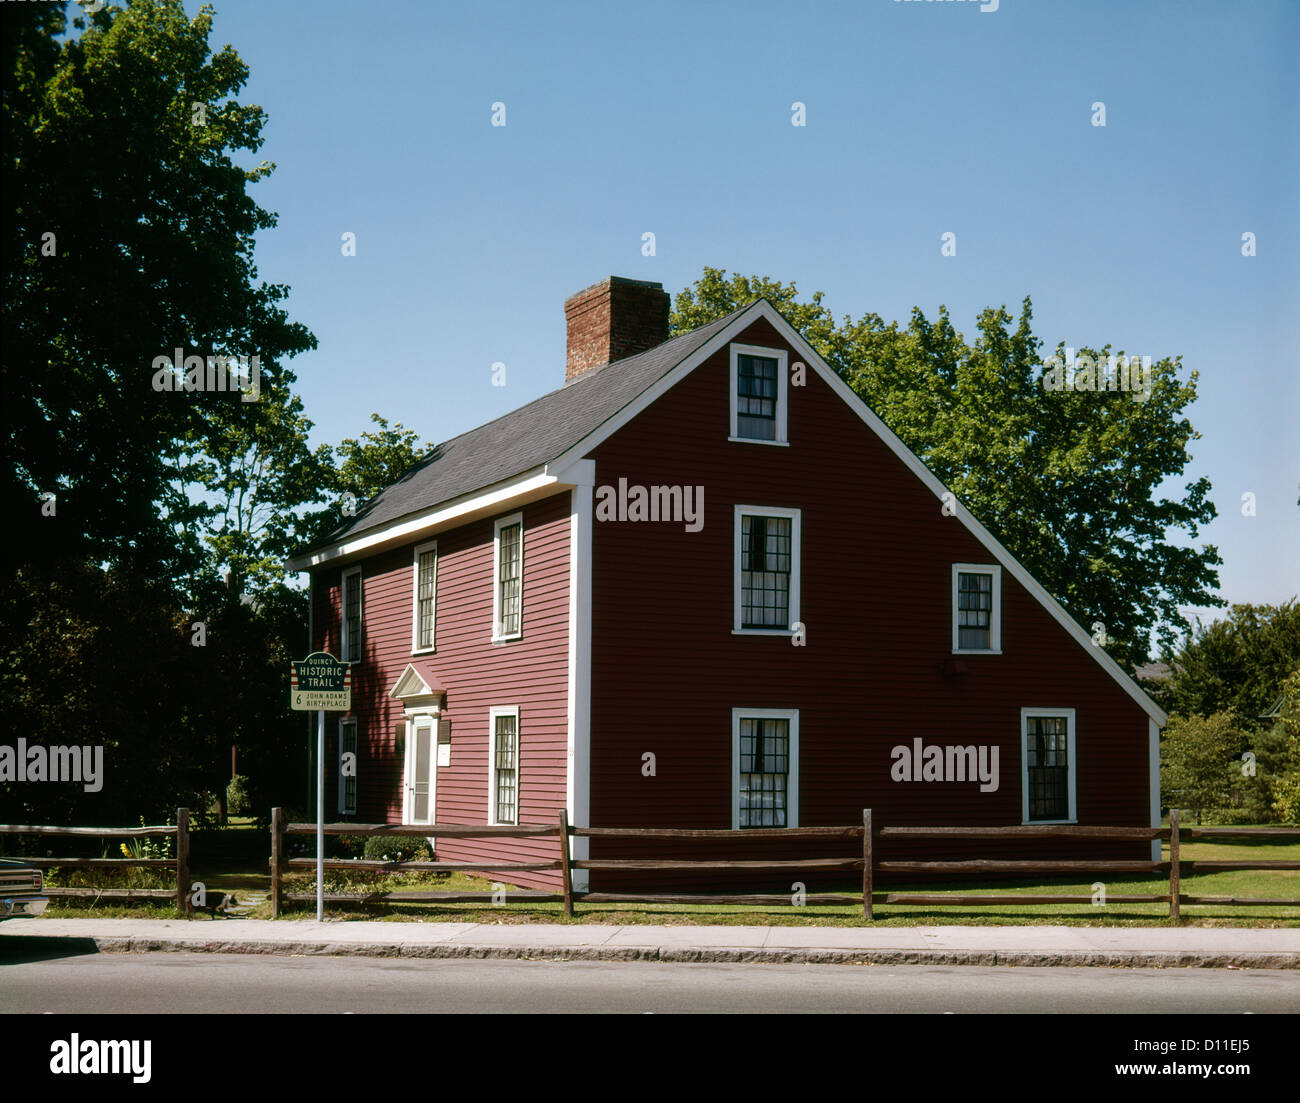 1980s BIRTHPLACE OF JOHN ADAMS 2ND PRESIDENT OF UNITED STATES QUINCY MA USA Stock Photo